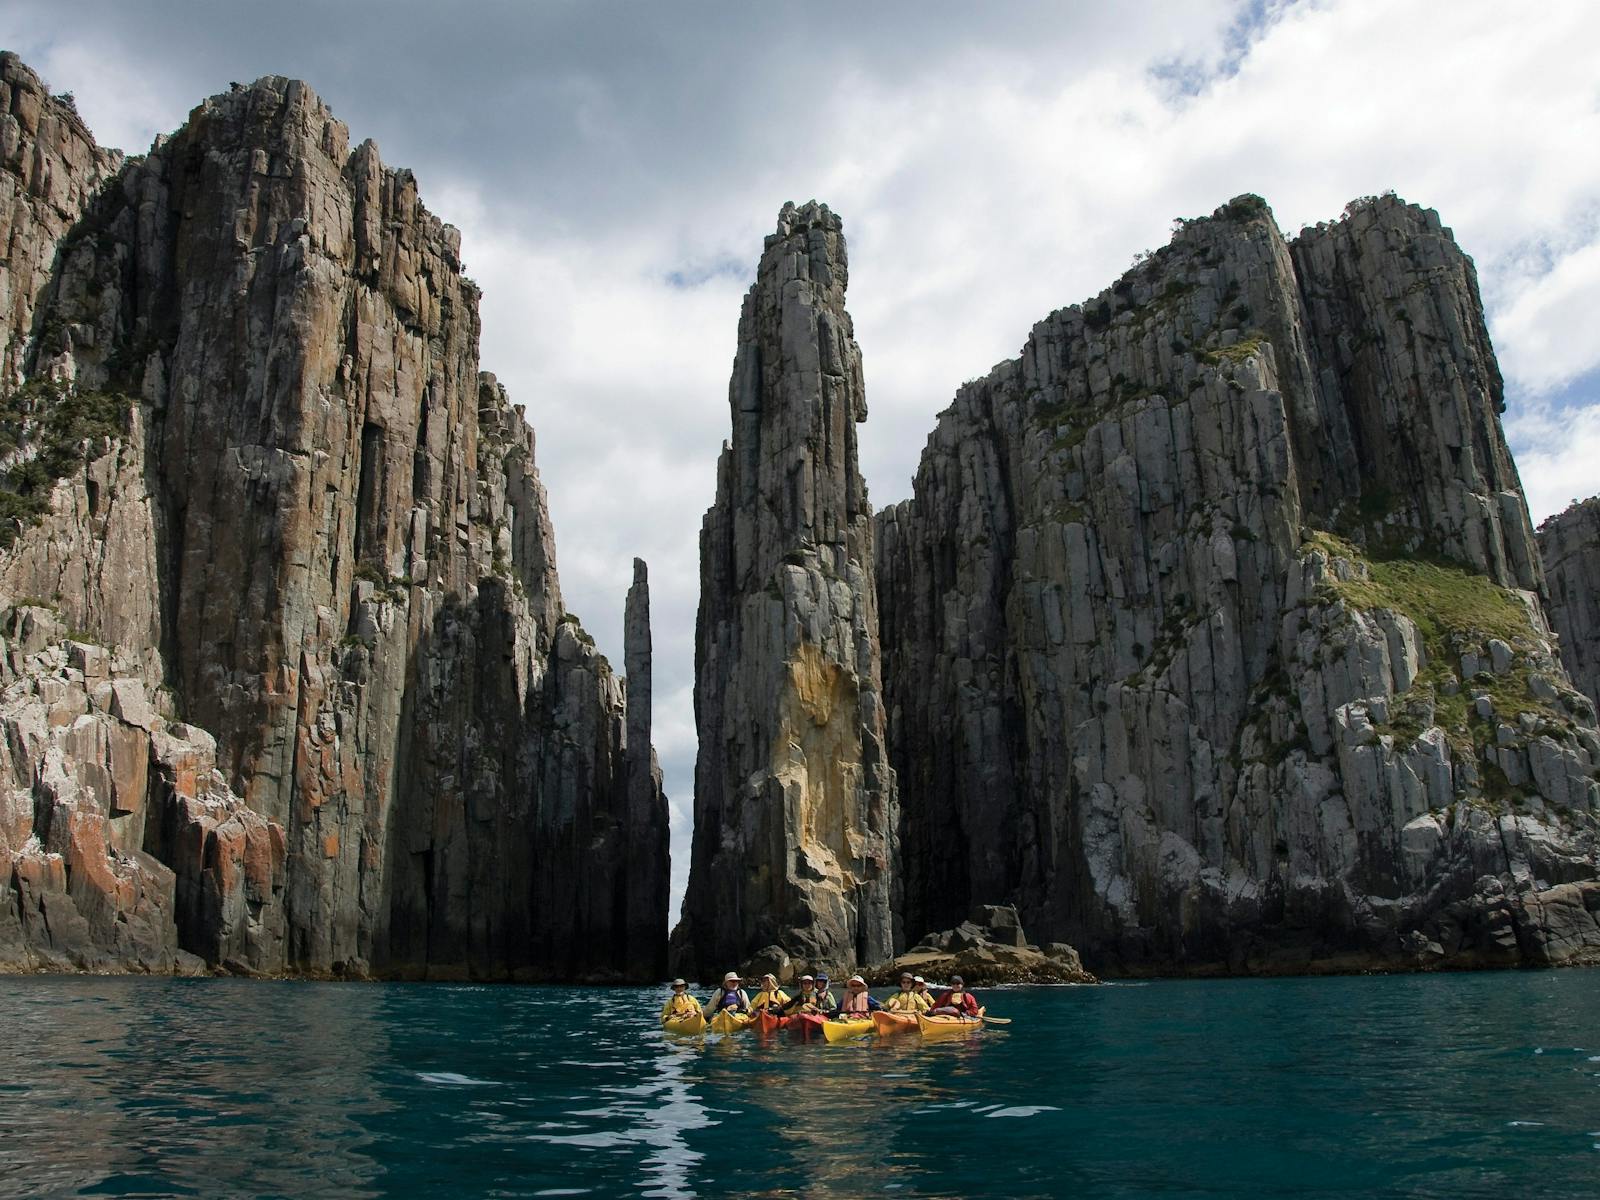 Kayakers outside the Totem Pole and Candlestick rock formations, Tasman National Park